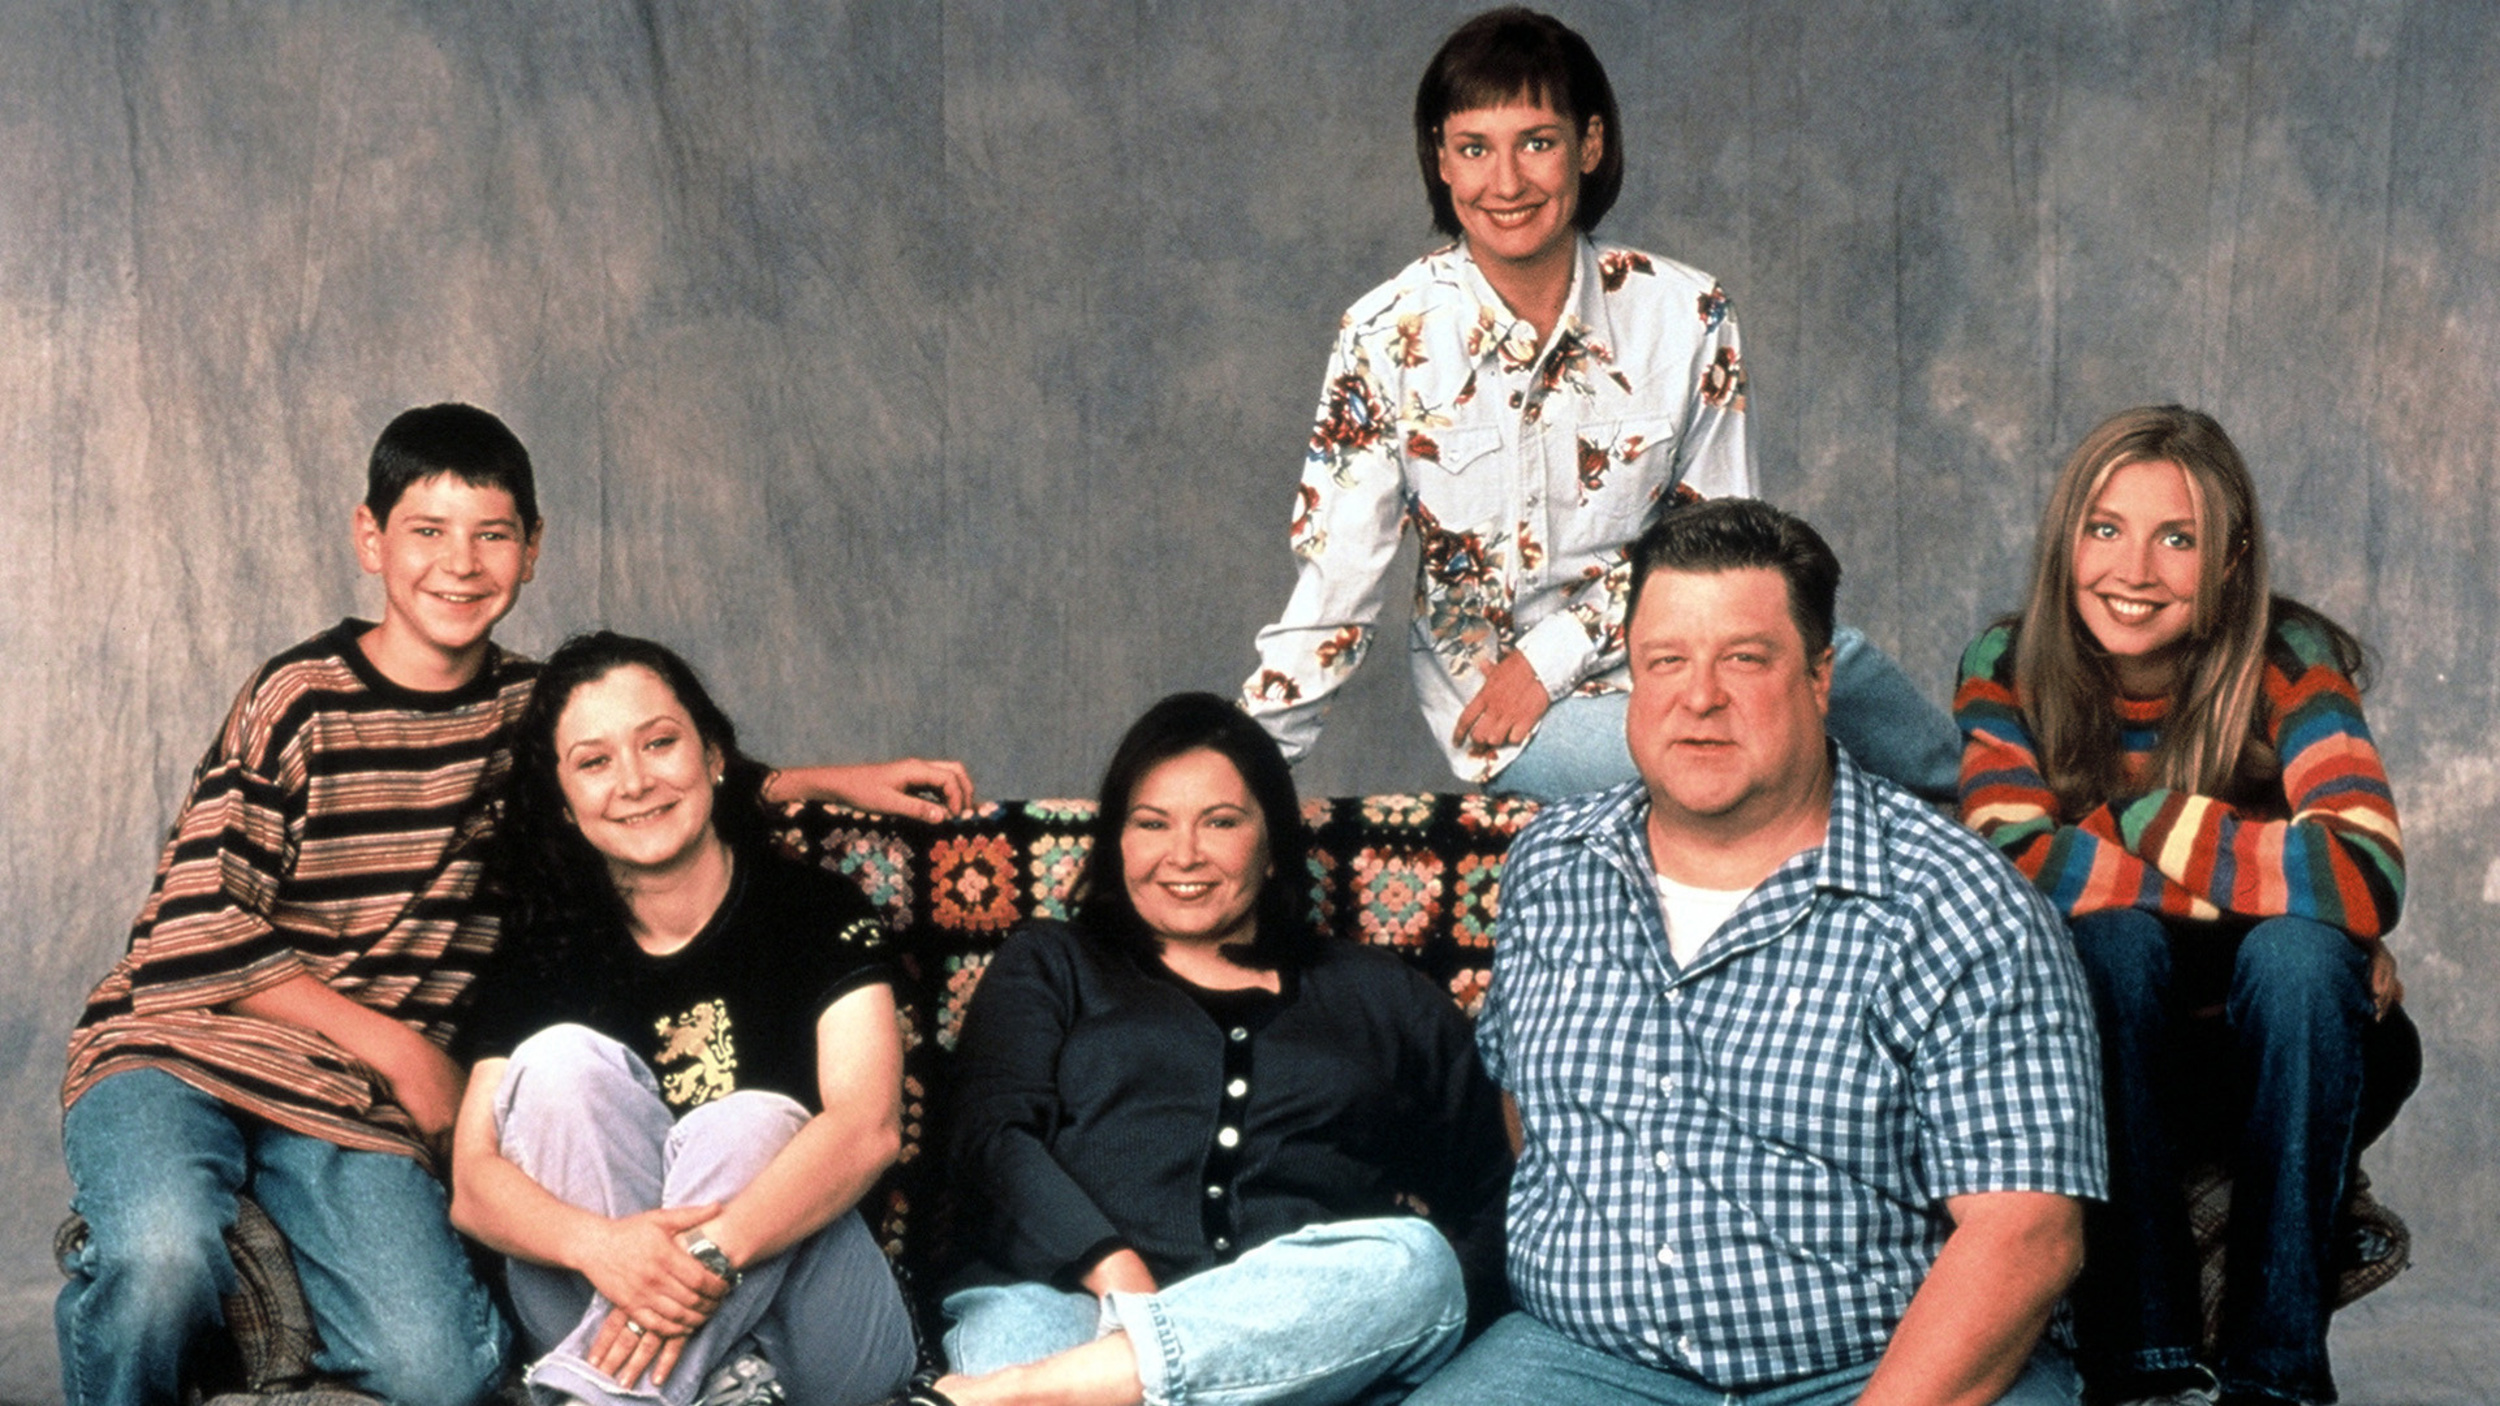 <p>The thing about shows that eventually go on to have revivals (like "Roseanne," "Will & Grace") or get saved by another network is that the original series finales still actually happened. Even if it’s retconned out of canonical existence. The original "Roseanne" series finale ended with an infamous 15-minute voiceover monologue that the events of the series were actually Roseanne writing a book based on her life, only she apparently changed some of the events that she didn’t like. Essentially a twist on the “it was all a dream” approach to bad storytelling but absolutely no better.</p><p><a href='https://www.msn.com/en-us/community/channel/vid-cj9pqbr0vn9in2b6ddcd8sfgpfq6x6utp44fssrv6mc2gtybw0us'>Follow us on MSN to see more of our exclusive entertainment content.</a></p>